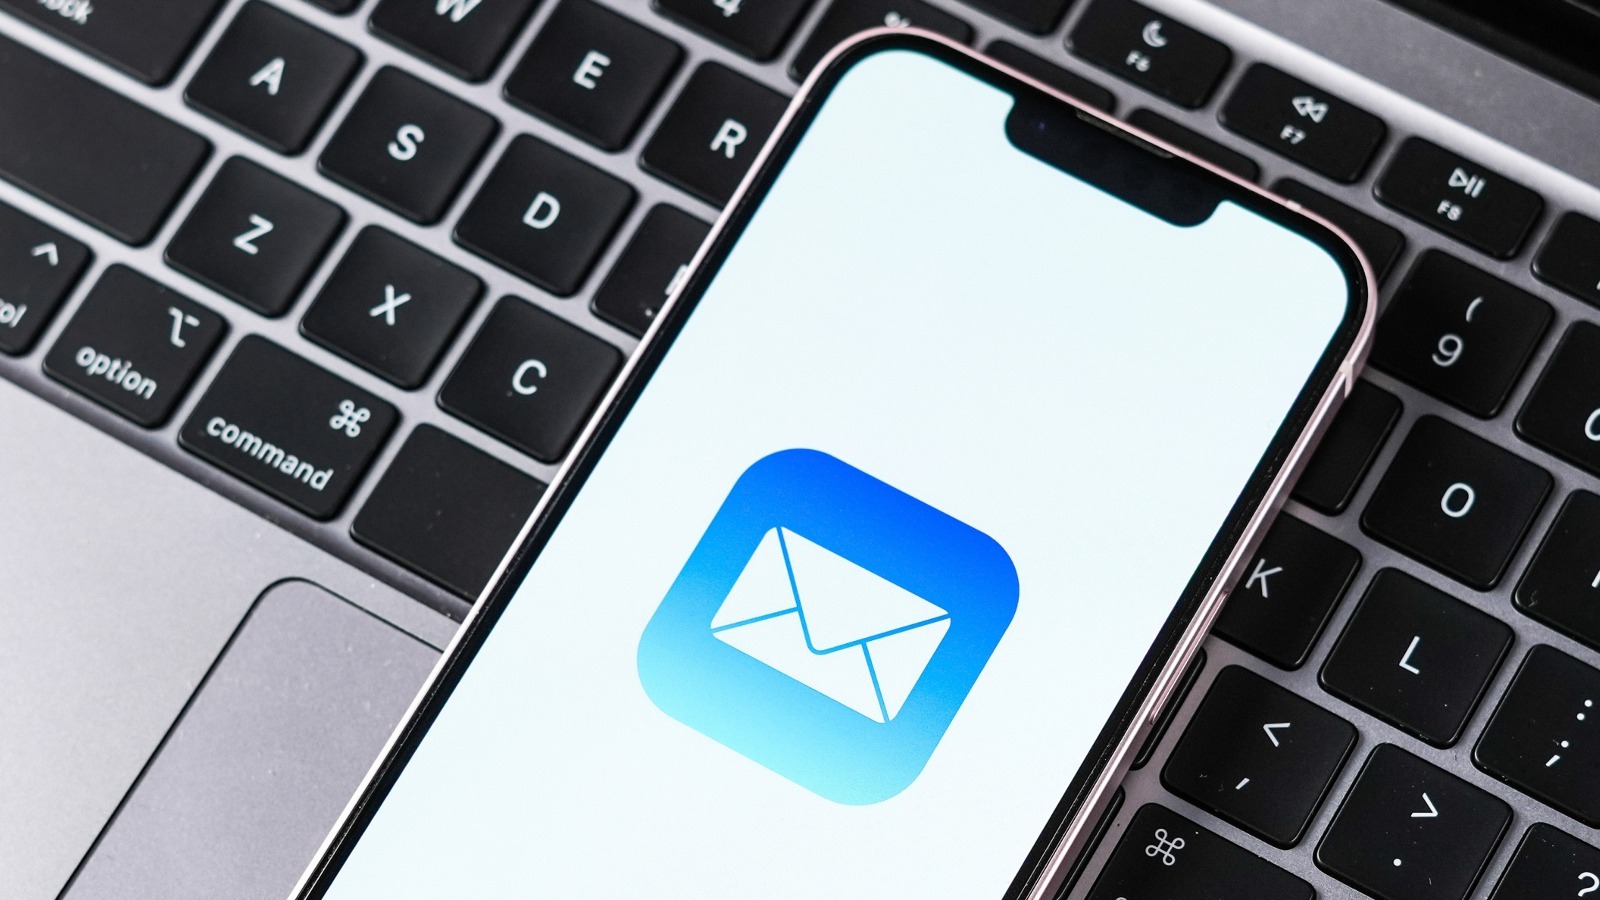 How To Add Another Email Address To Your iPhone’s Mail App